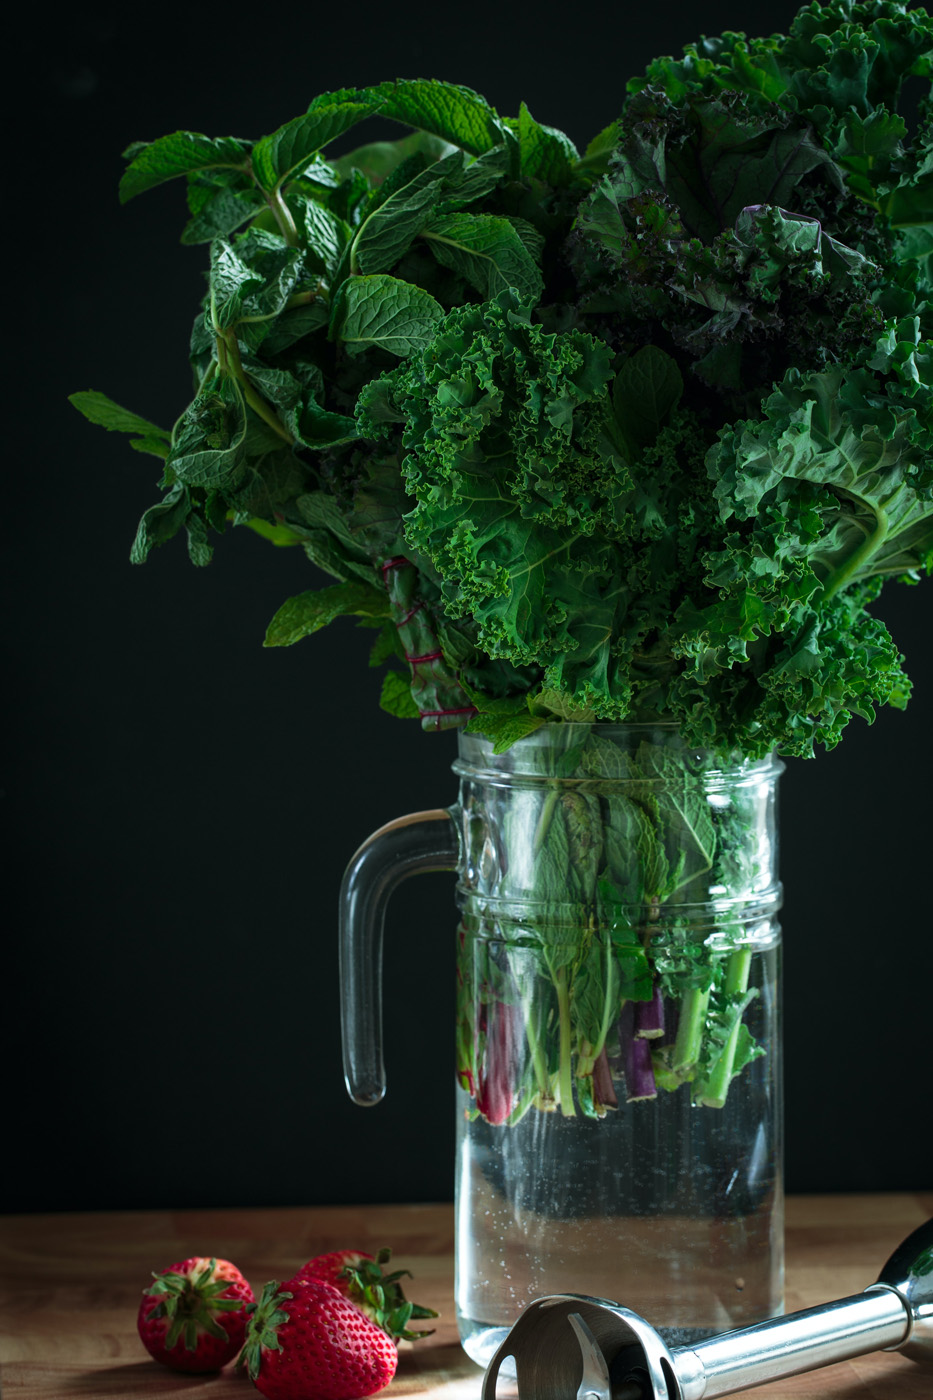 leafy greens kale in glass pitcher with strawberries